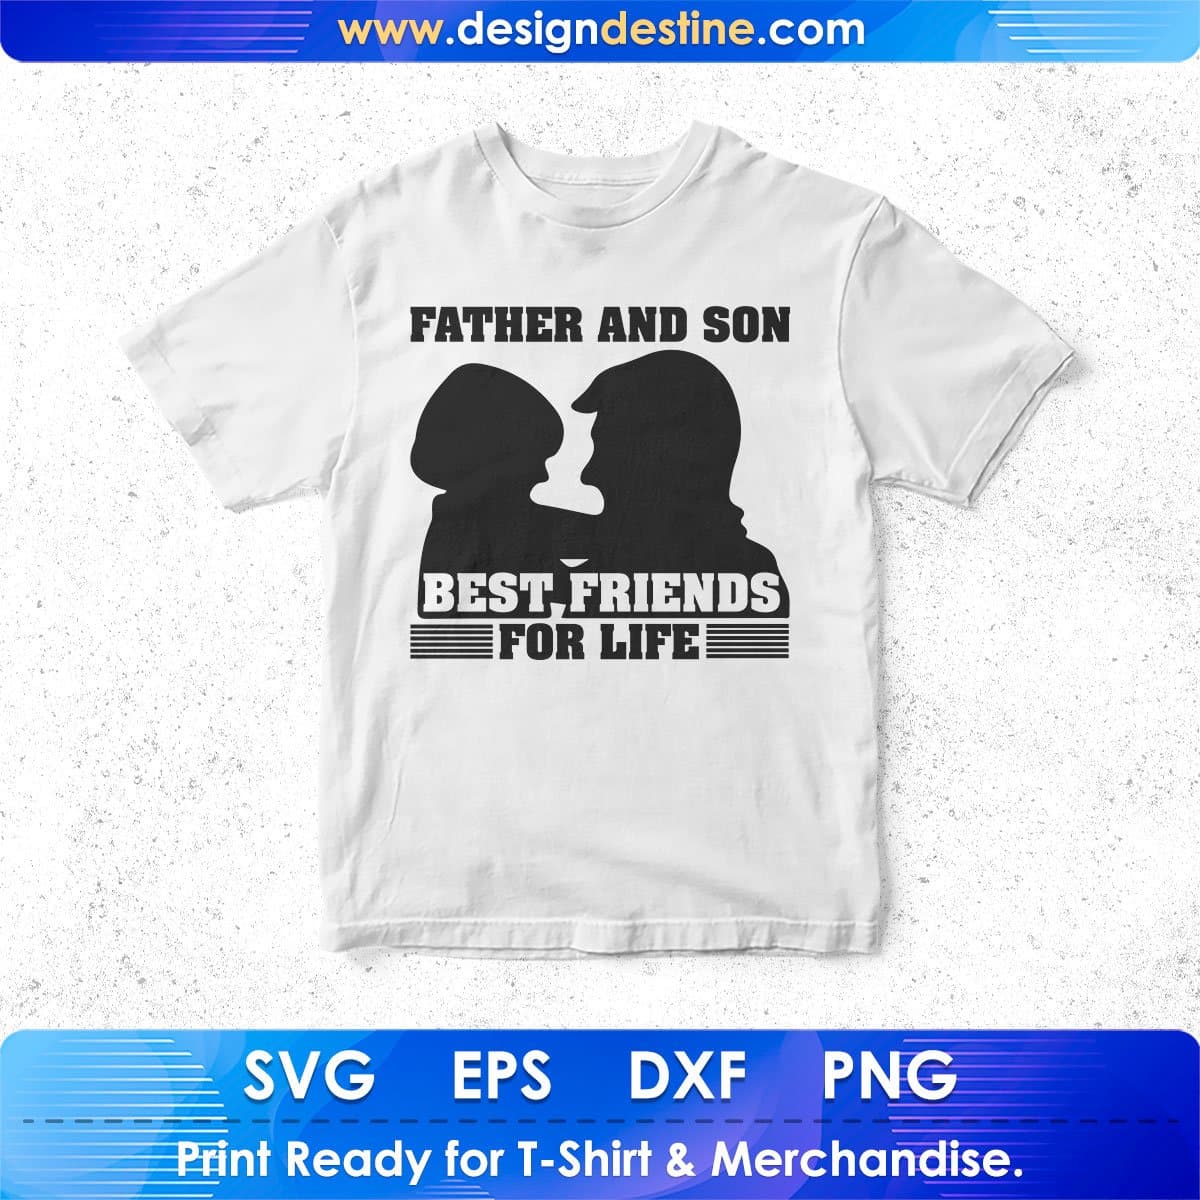 Father And Son Best Friends For Life T shirt Design Svg Printable File –  Vectortshirtdesigns